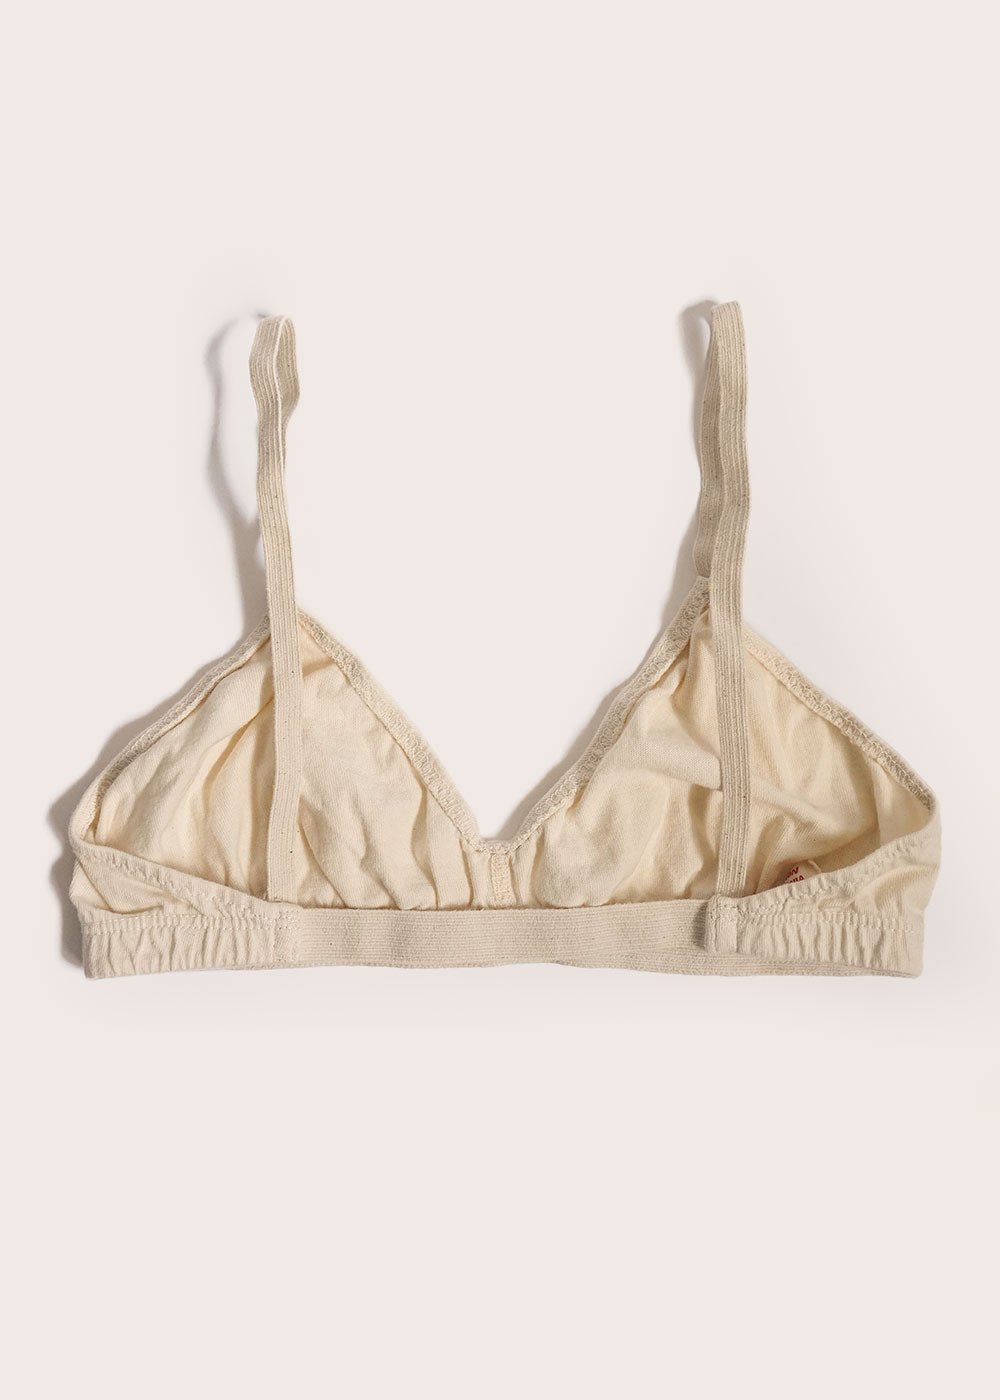 Cotton Bra - Buy 100 % Pure Cotton Bras Online in India (Page 23)